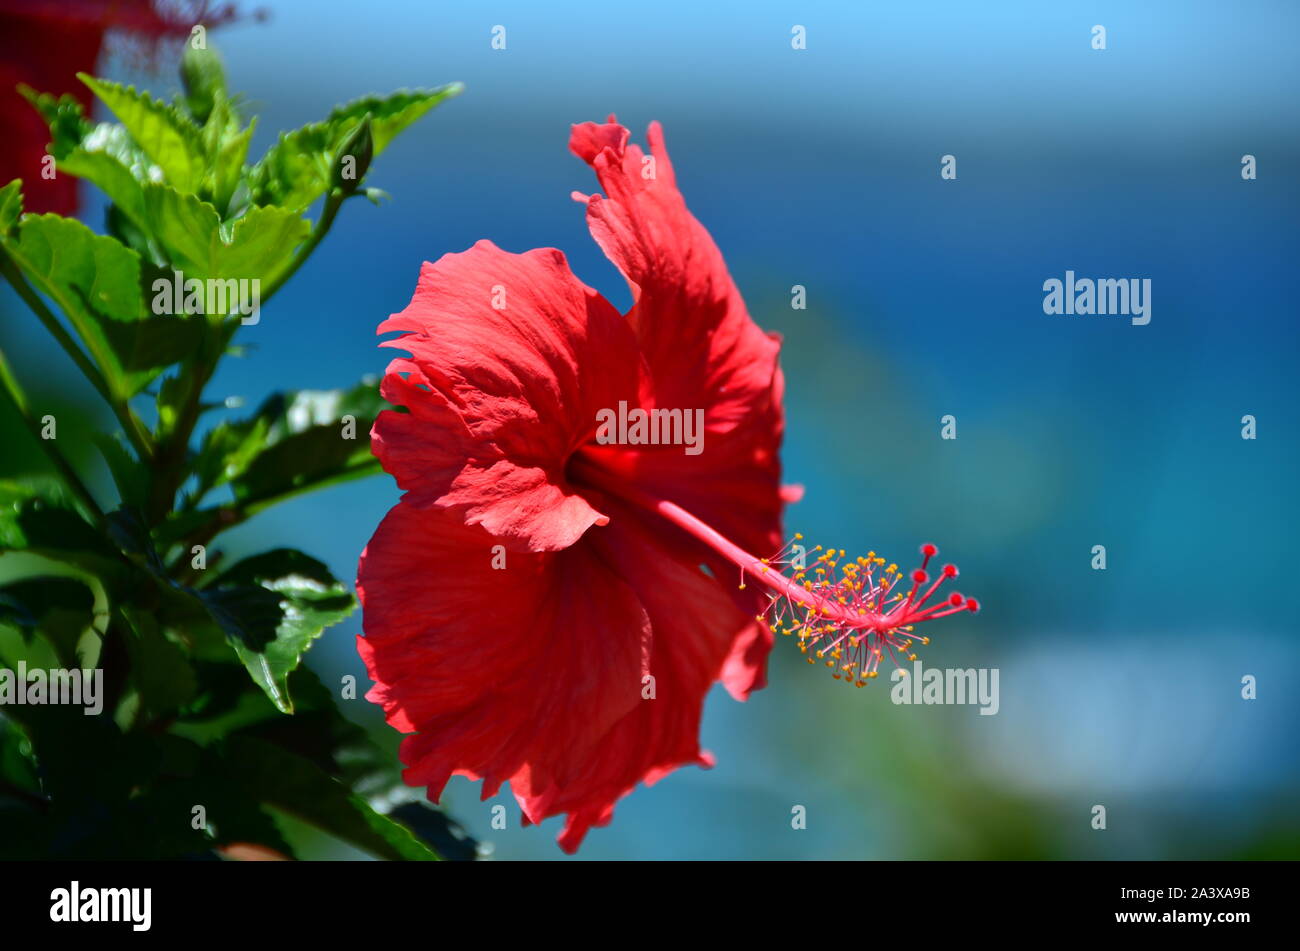 The view of the flowers in the garden Stock Photo